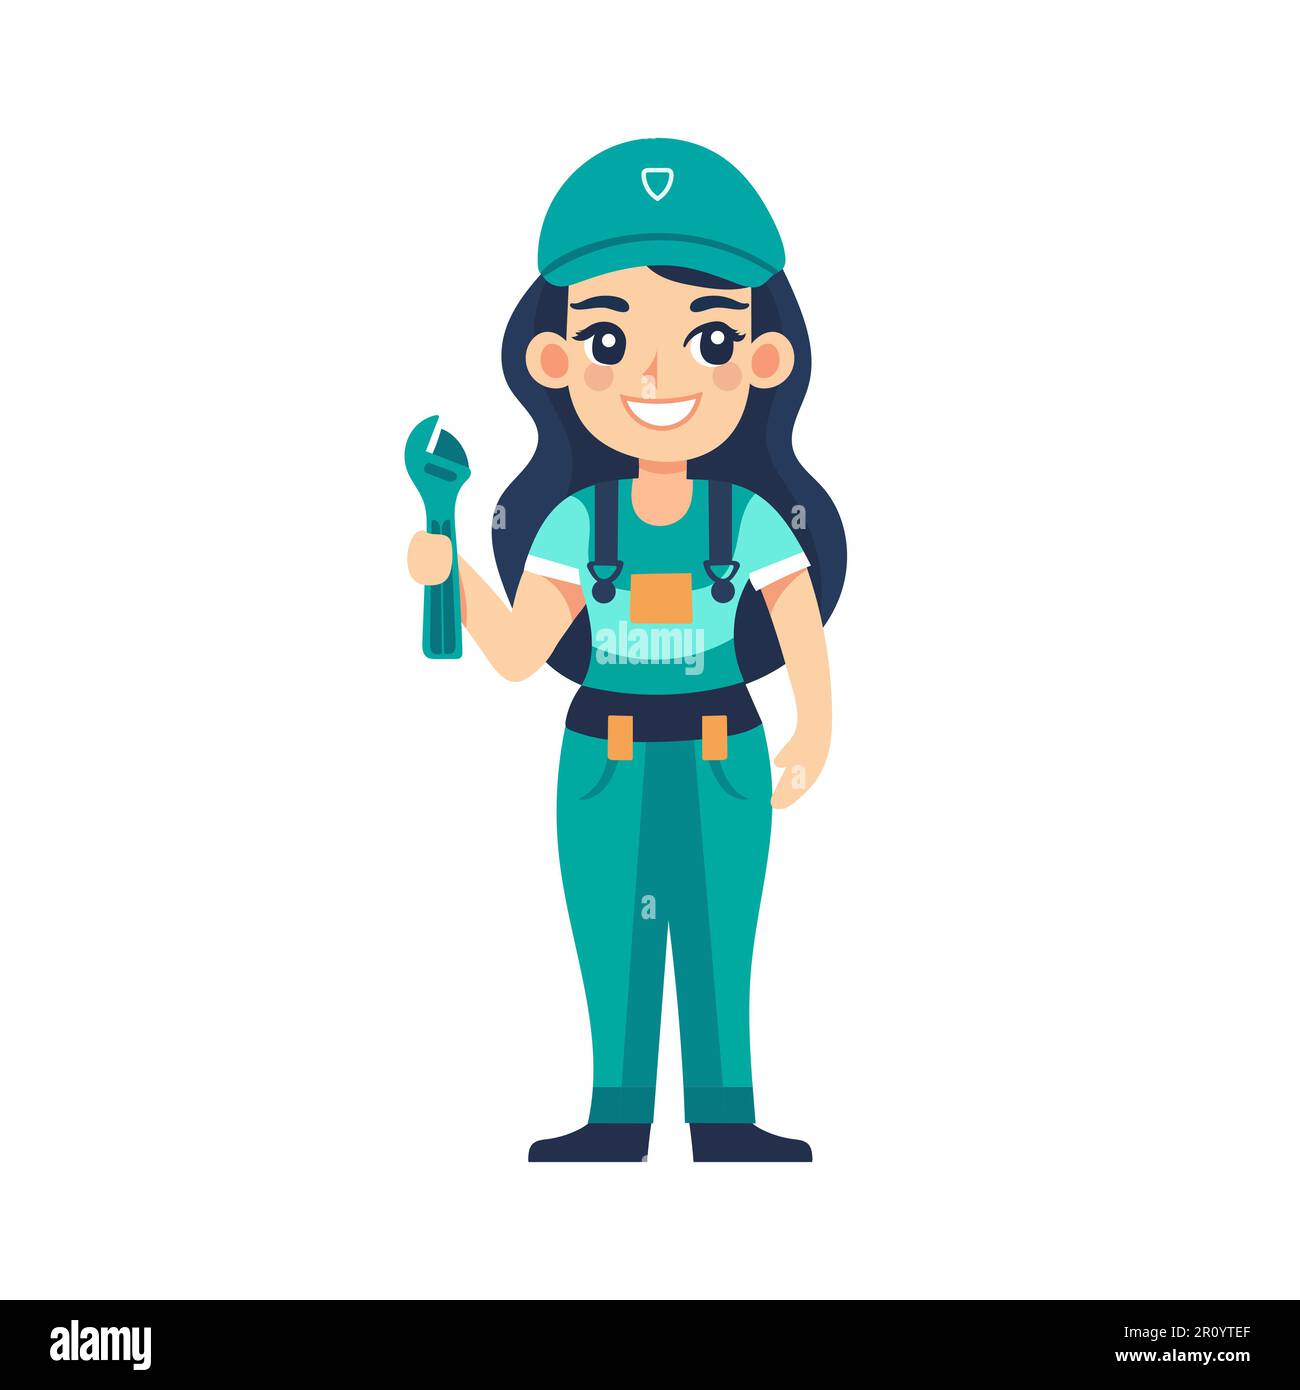 Woman mechanic with a wrench isolate on white background. Mascot of cute girl wearing uniform. Cartoon flat character vector illustration Stock Vector